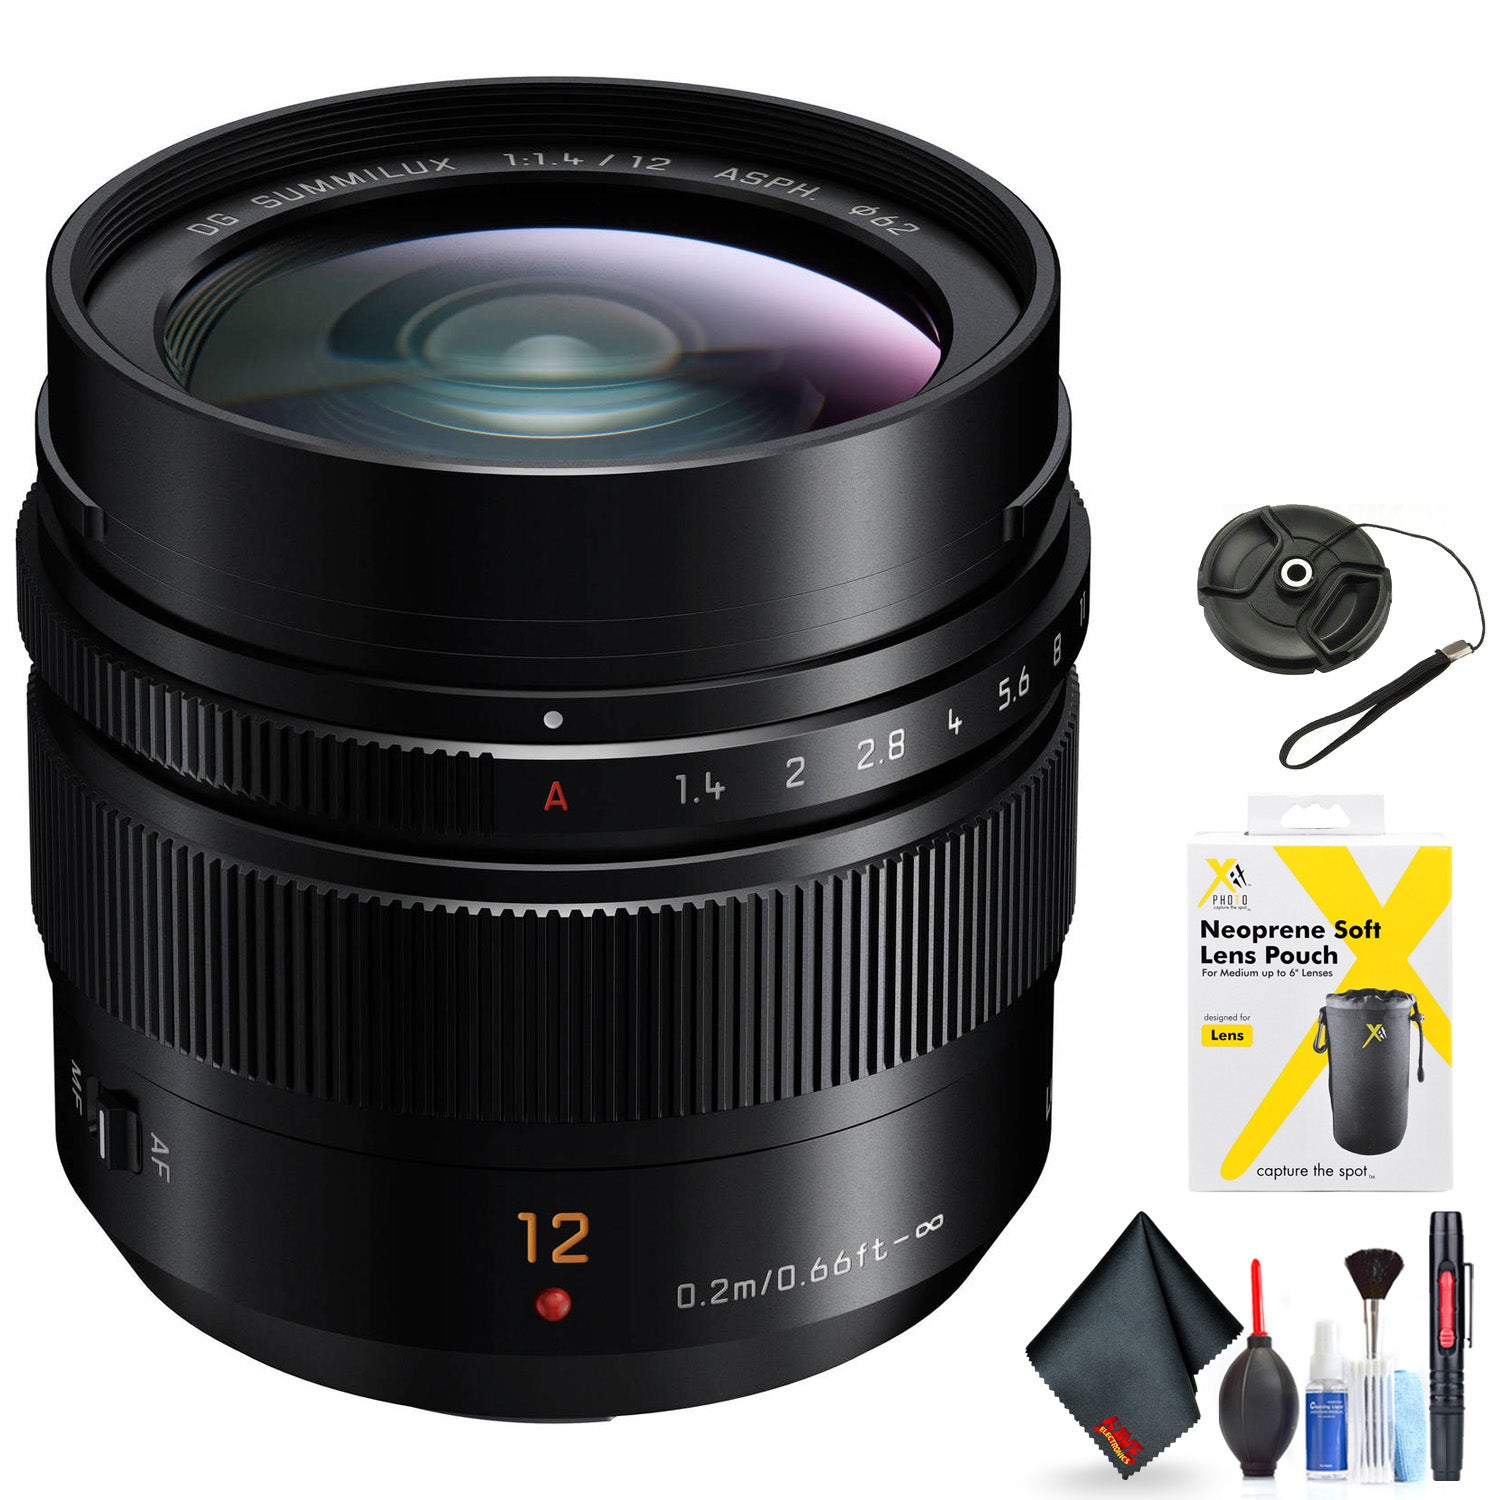 Panasonic Leica DG Summilux 12mm f/1.4 ASPH. Lens for Micro Four Thirds Mount + Accessories (International Model with 2